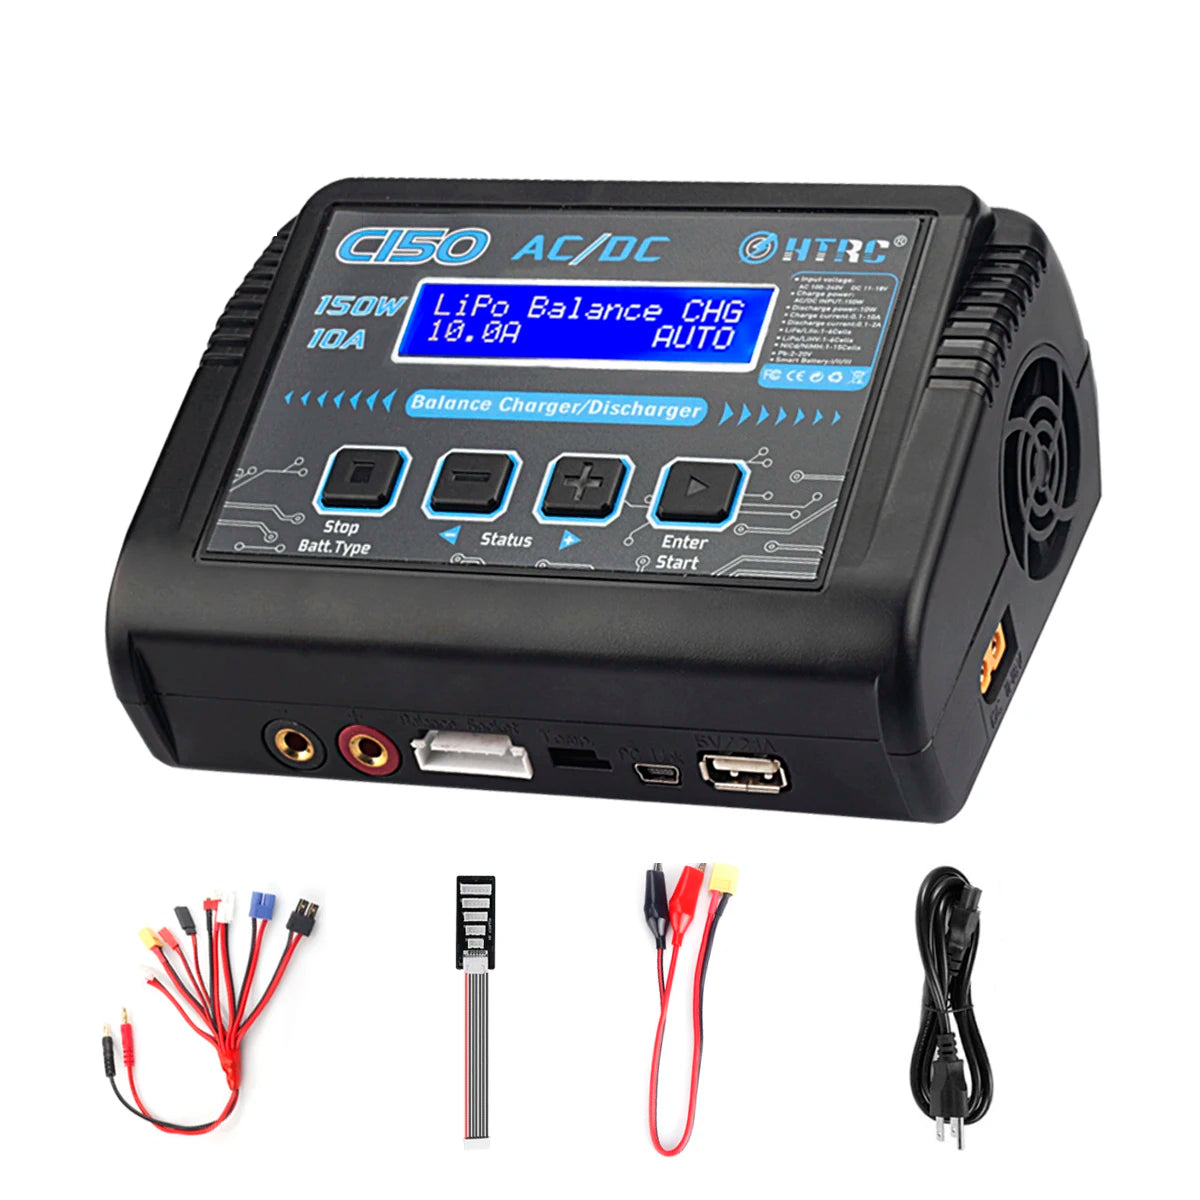 HTRC T240 Duo Lipo Charger, AUTO R((0o 1 Balaige Charger Discharger Stop Batt Type